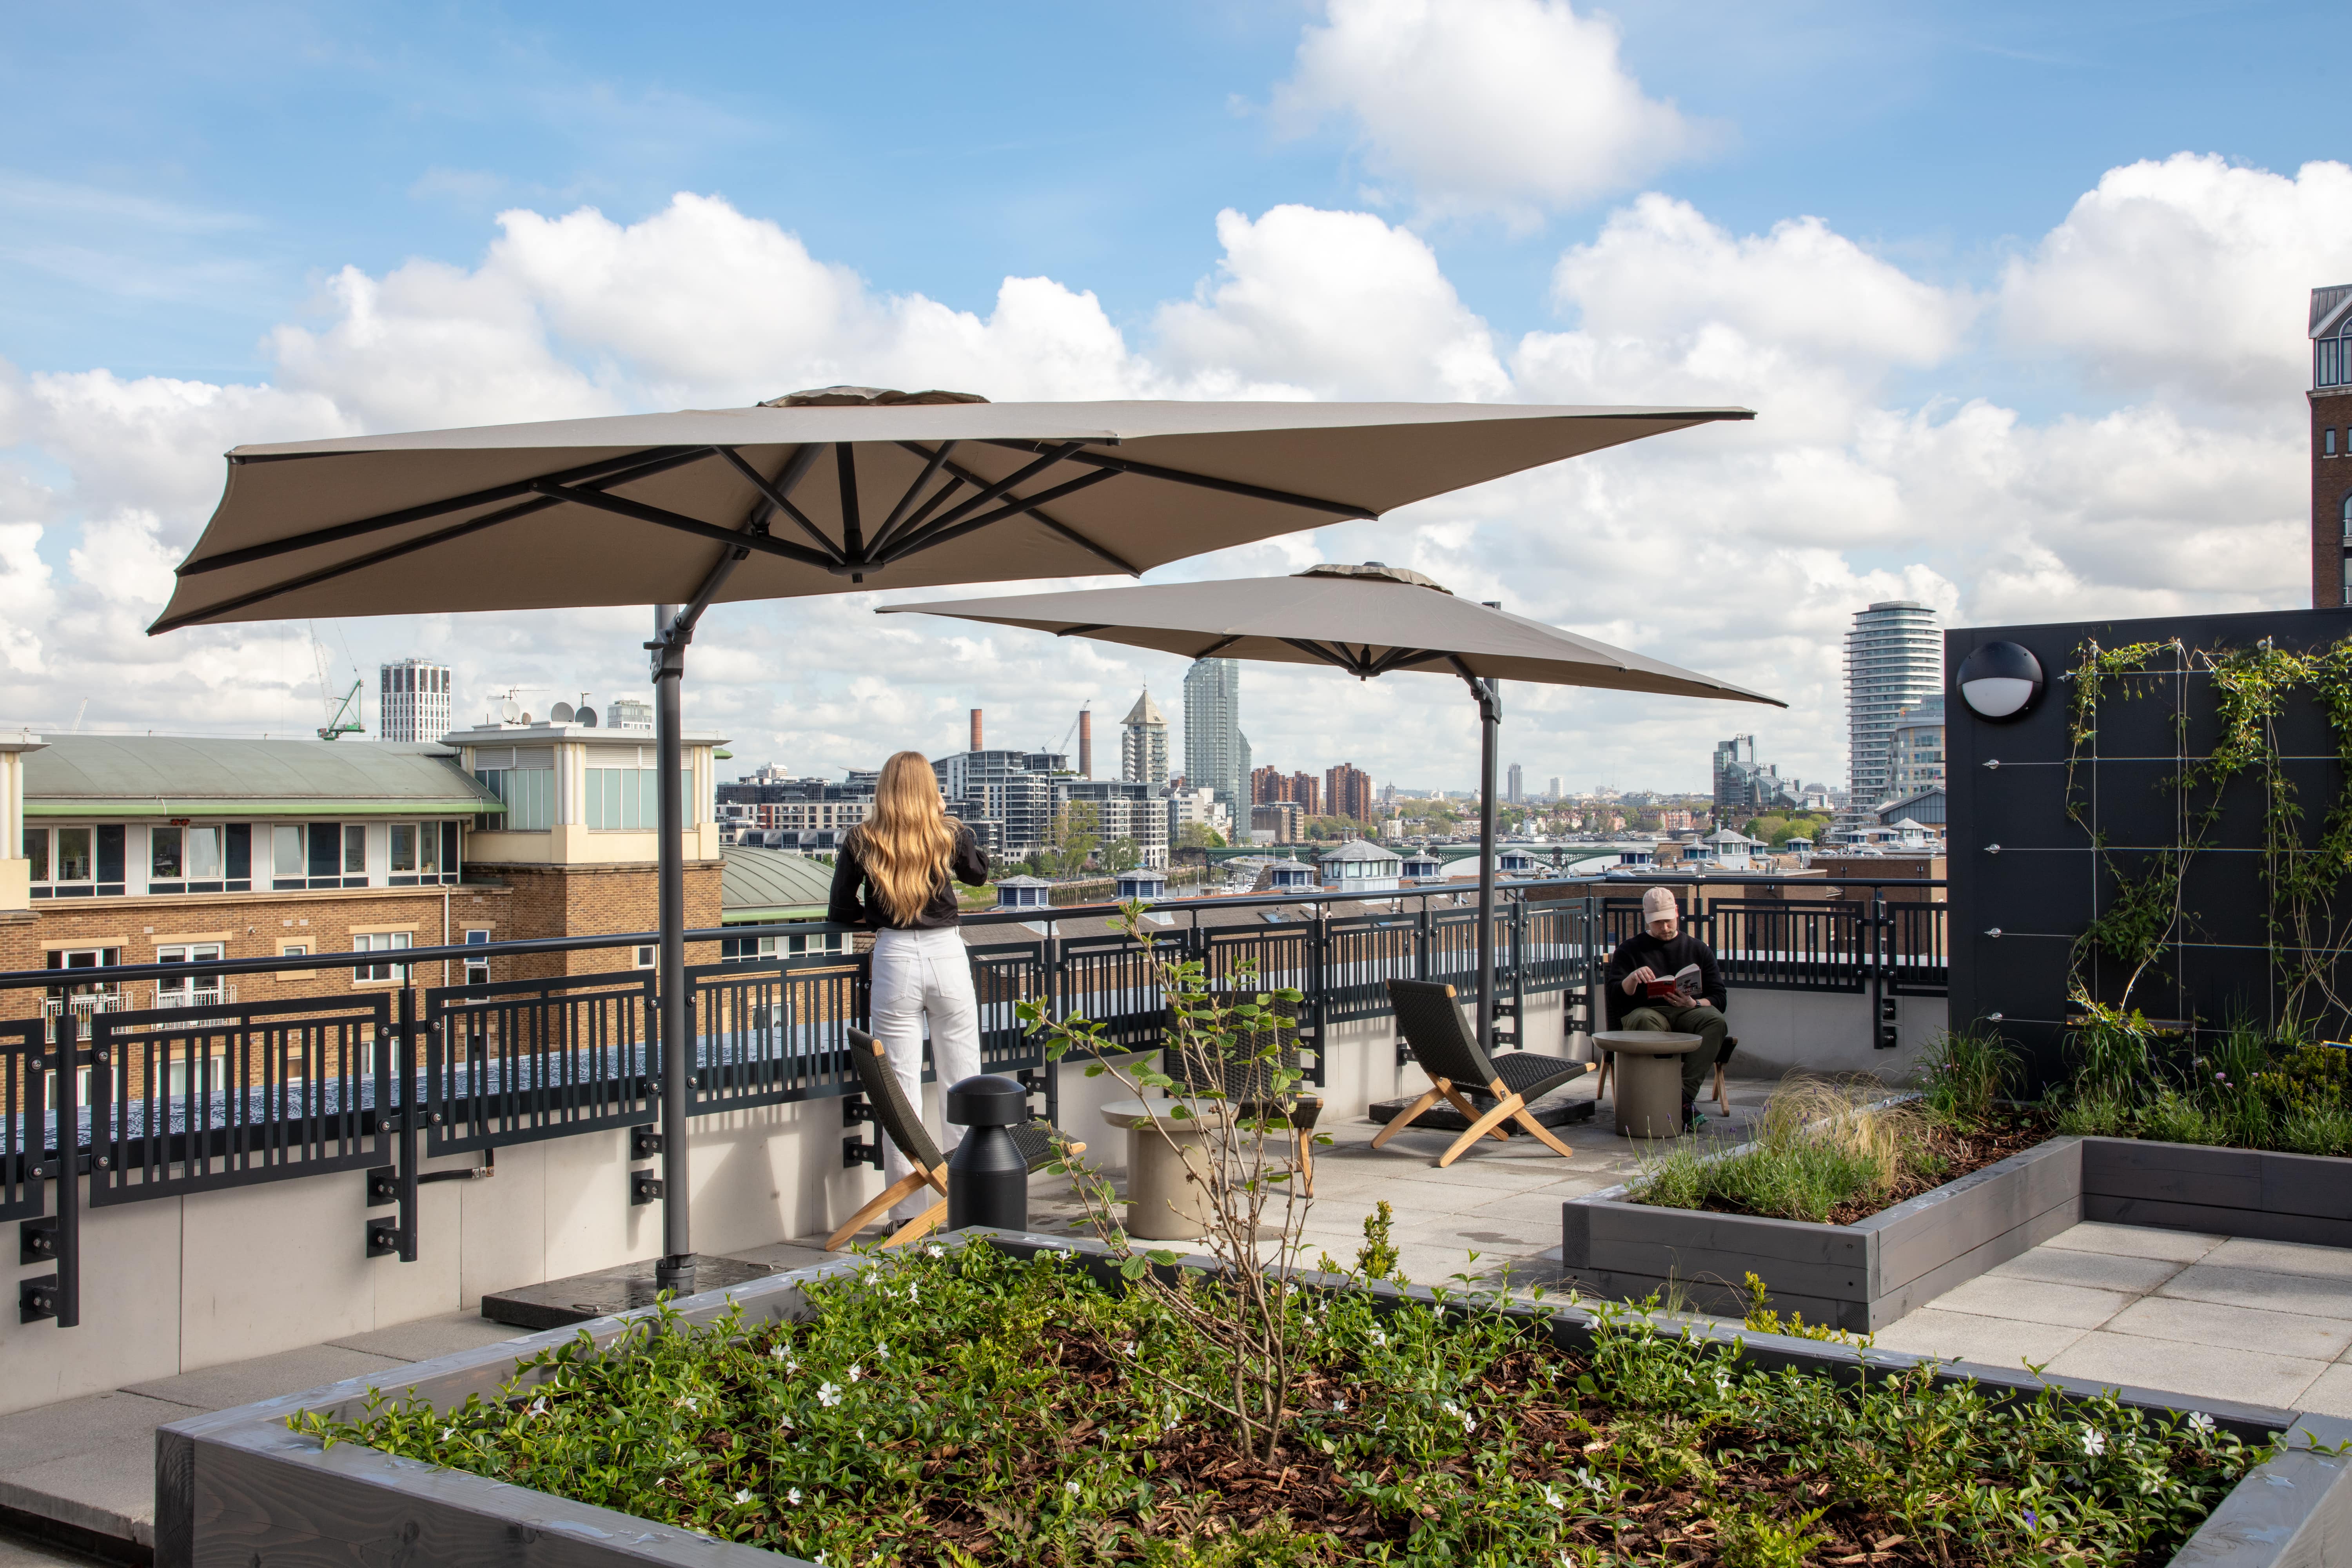 Take in the skyline from the roof terrace